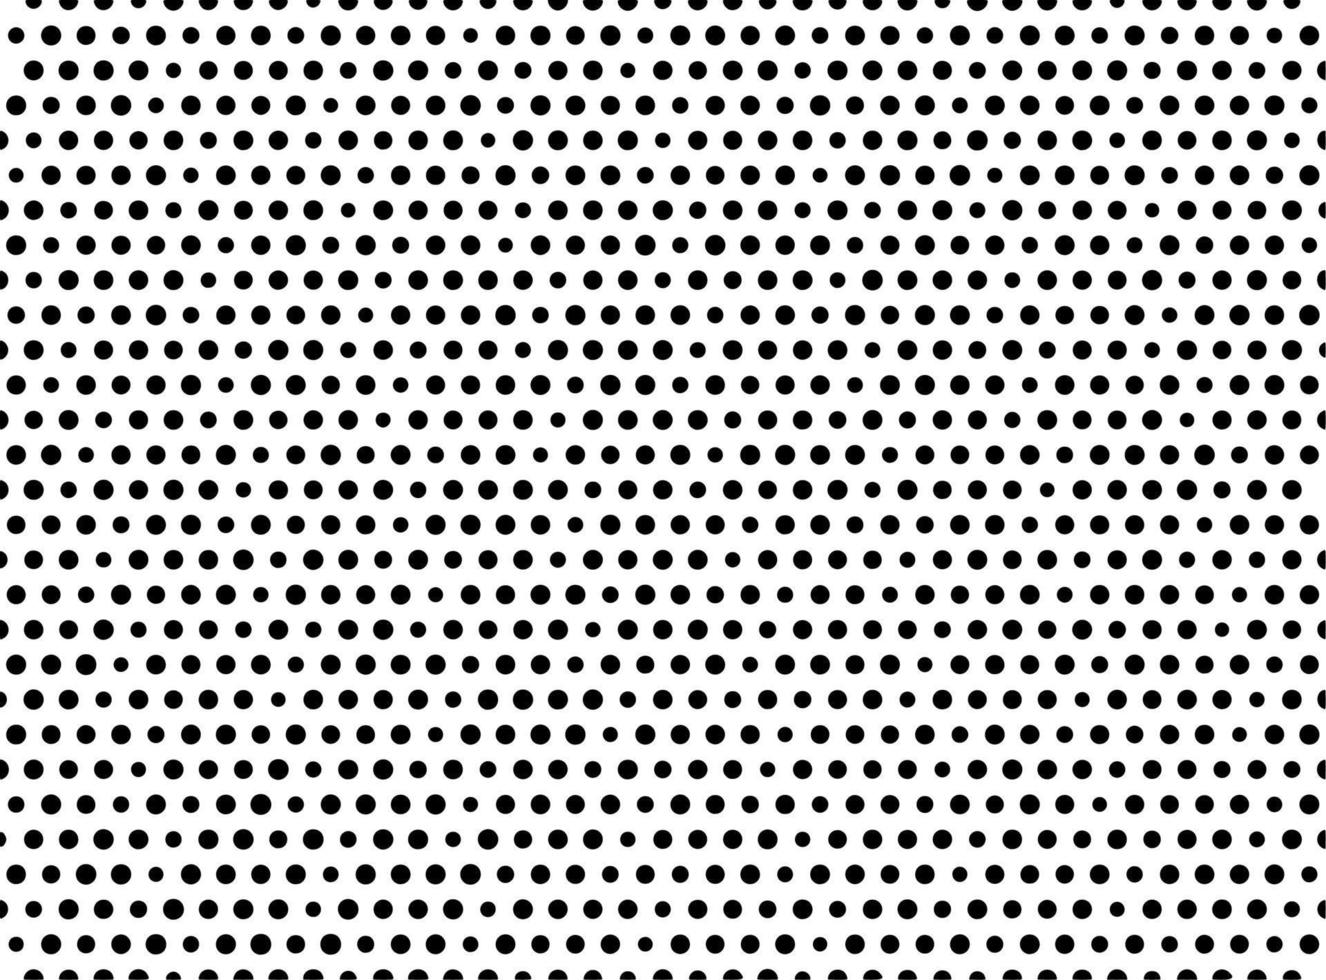 vector of halftone pattern background